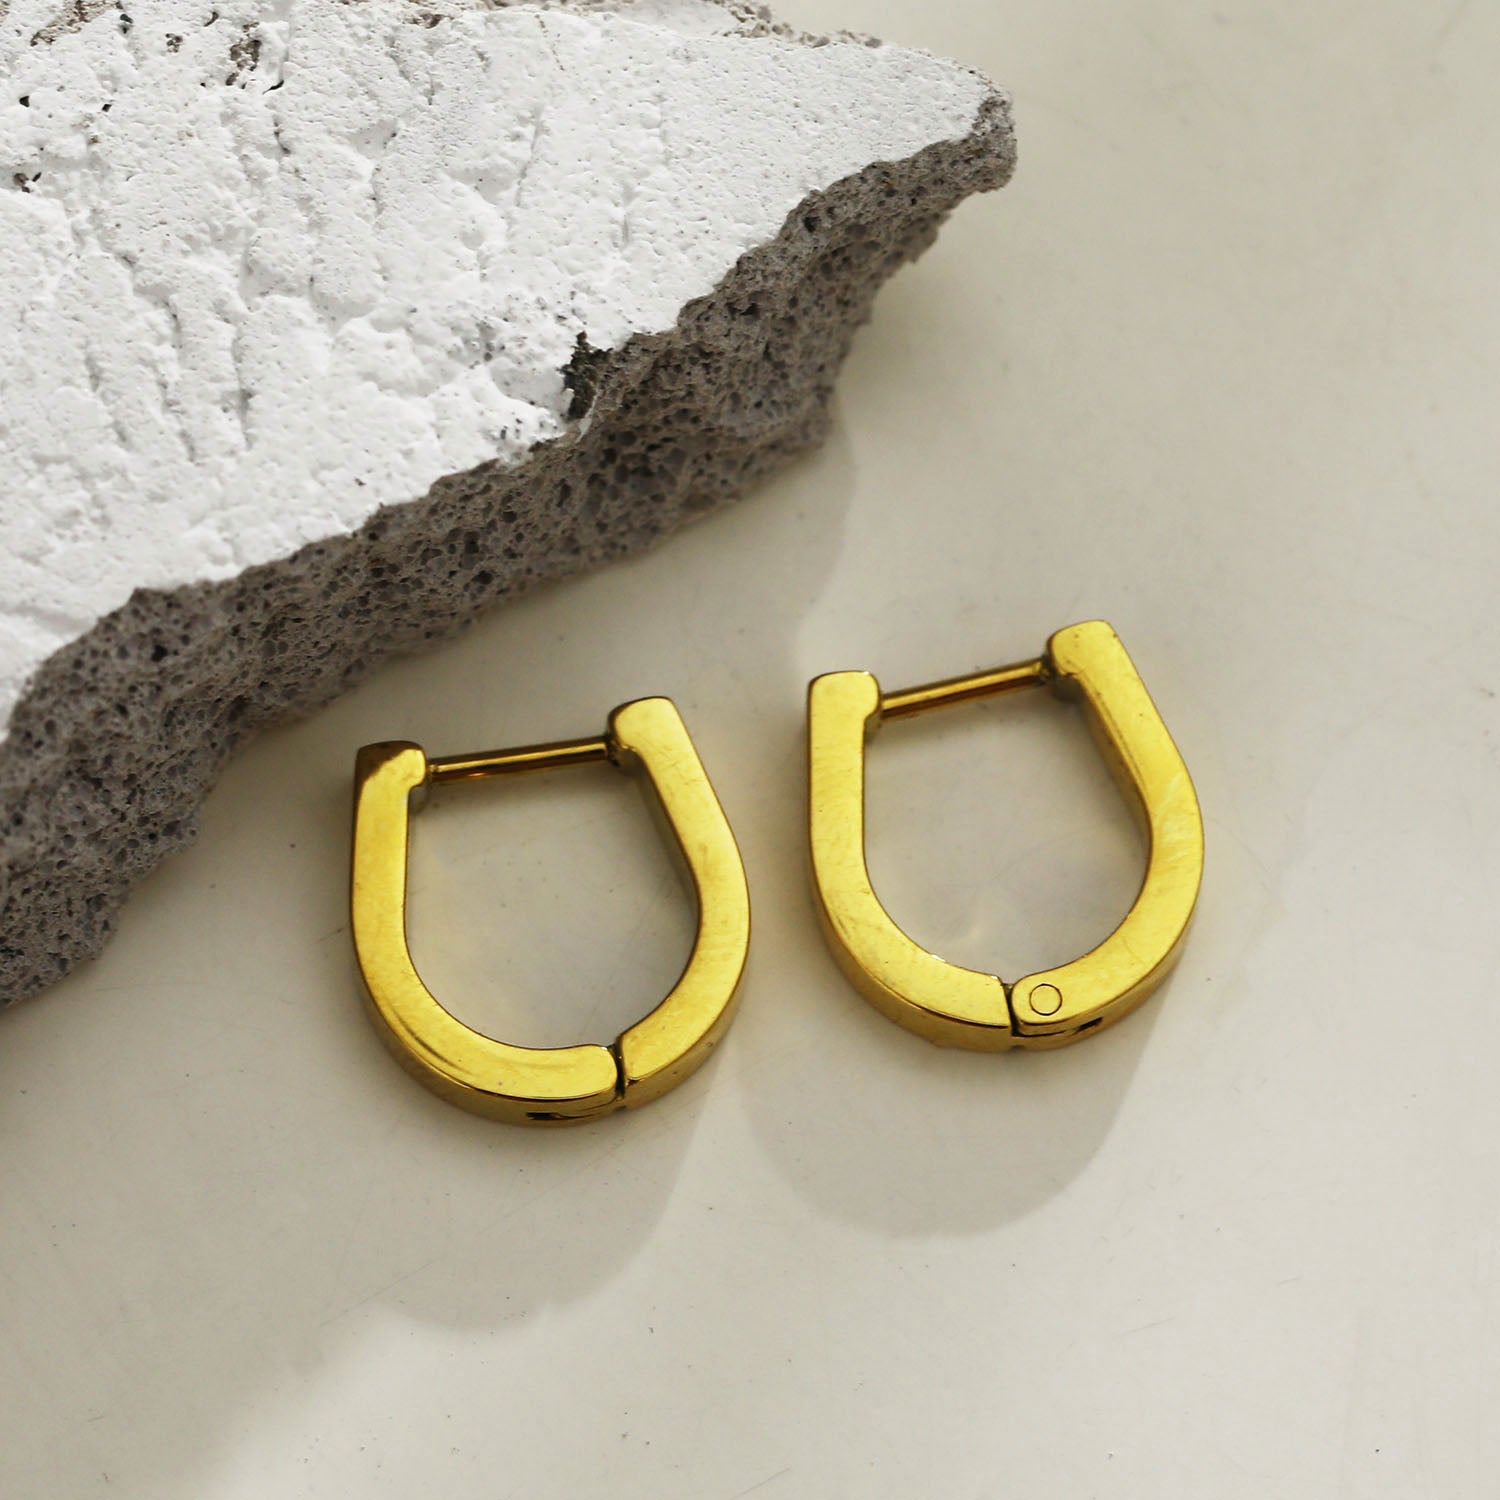 Style: CADEO 122238 'Lucky' Horse-Shoe Shaped Contemporary Hoop Earrings.